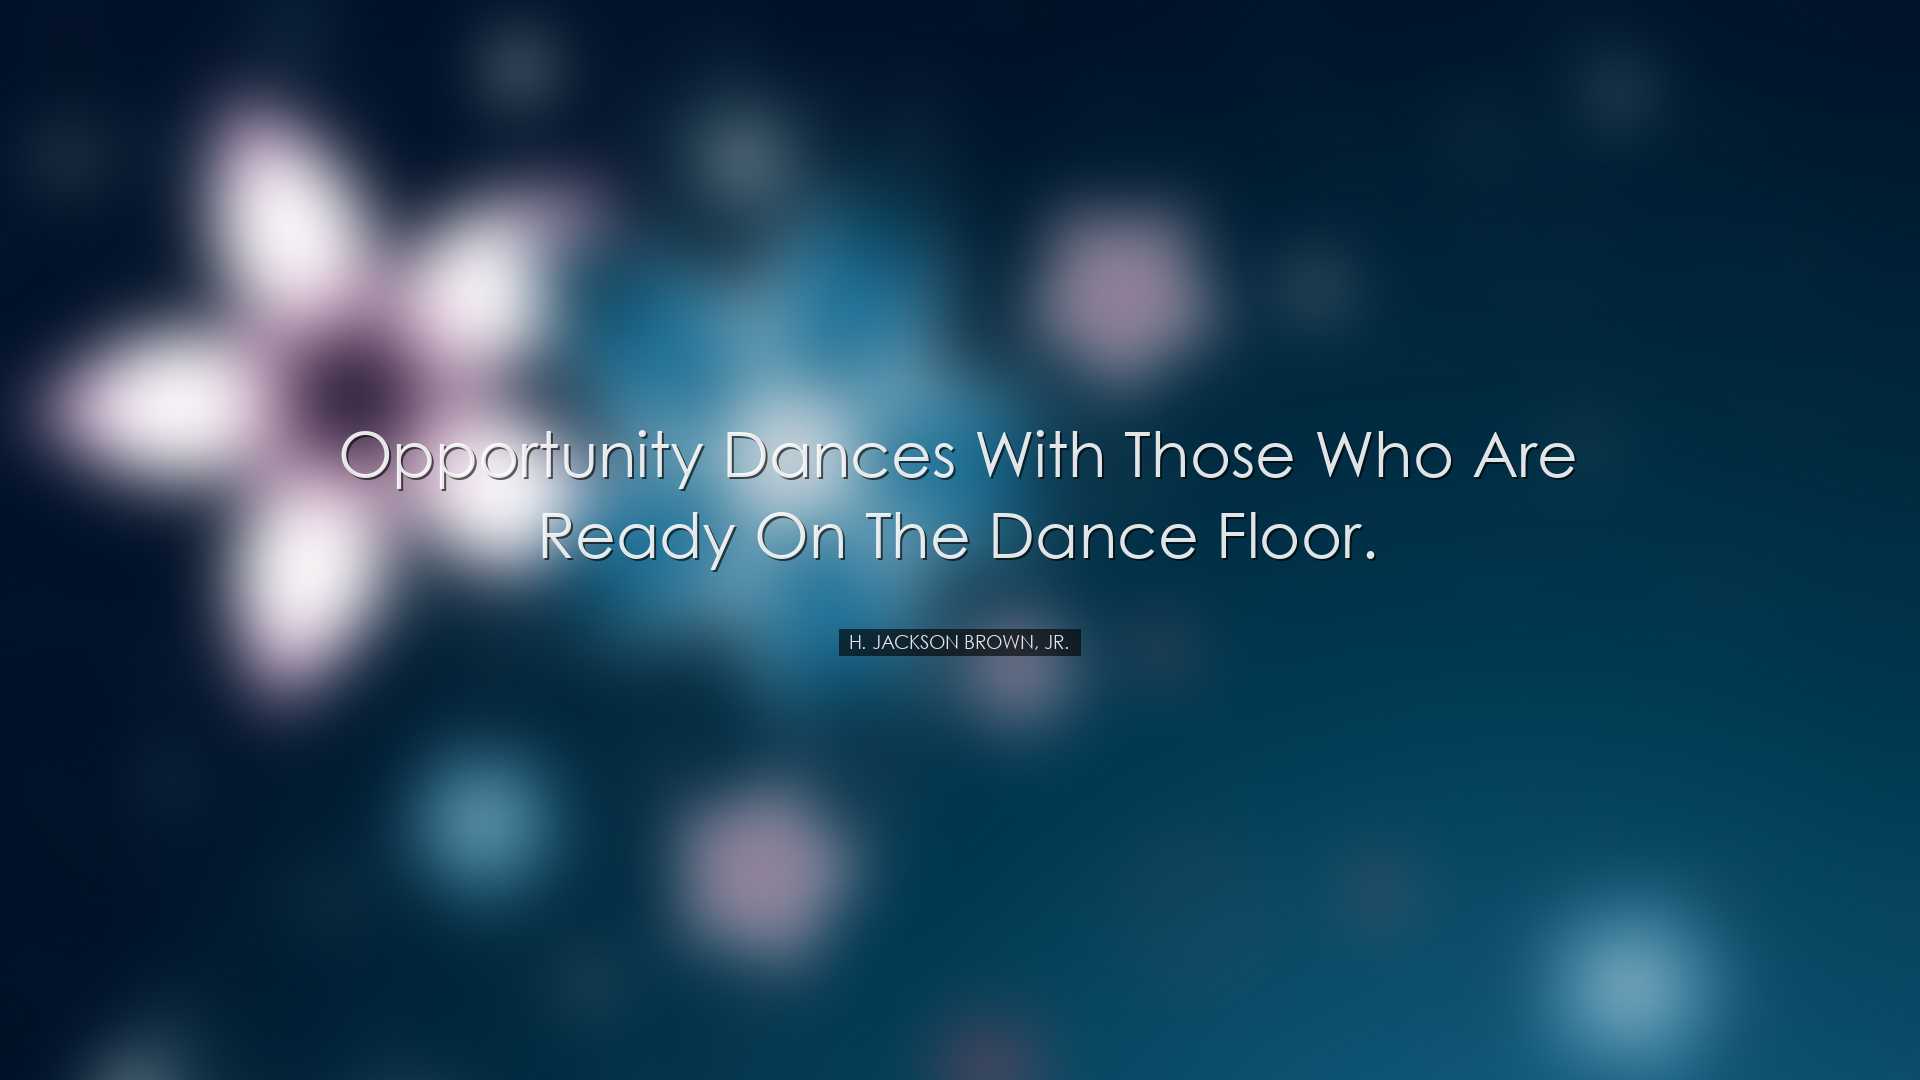 Opportunity dances with those who are ready on the dance floor. -